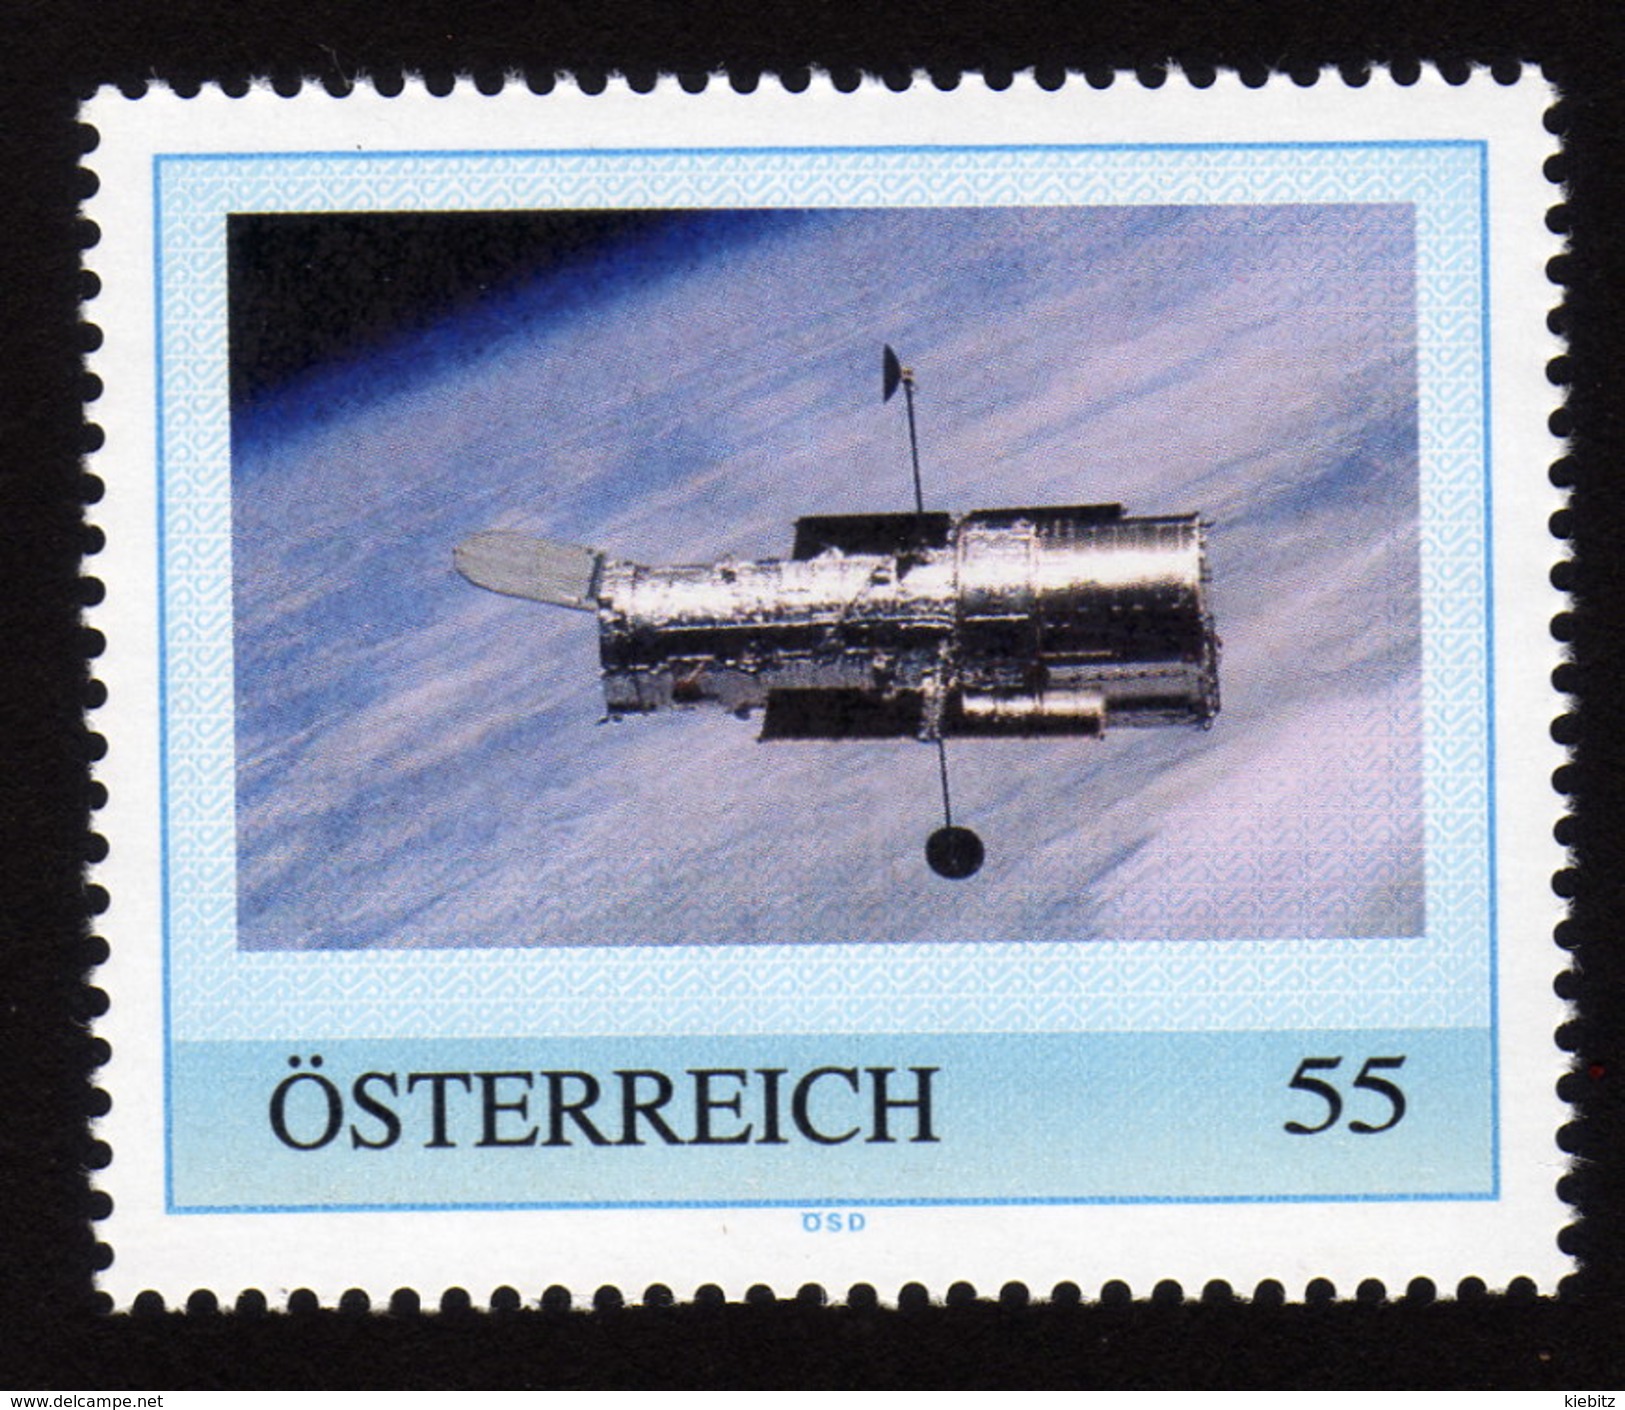 ÖSTERREICH 2009 ** Hubble Space Telescope über Der Erde - PM Personalized Stamp MNH - Astronomùia